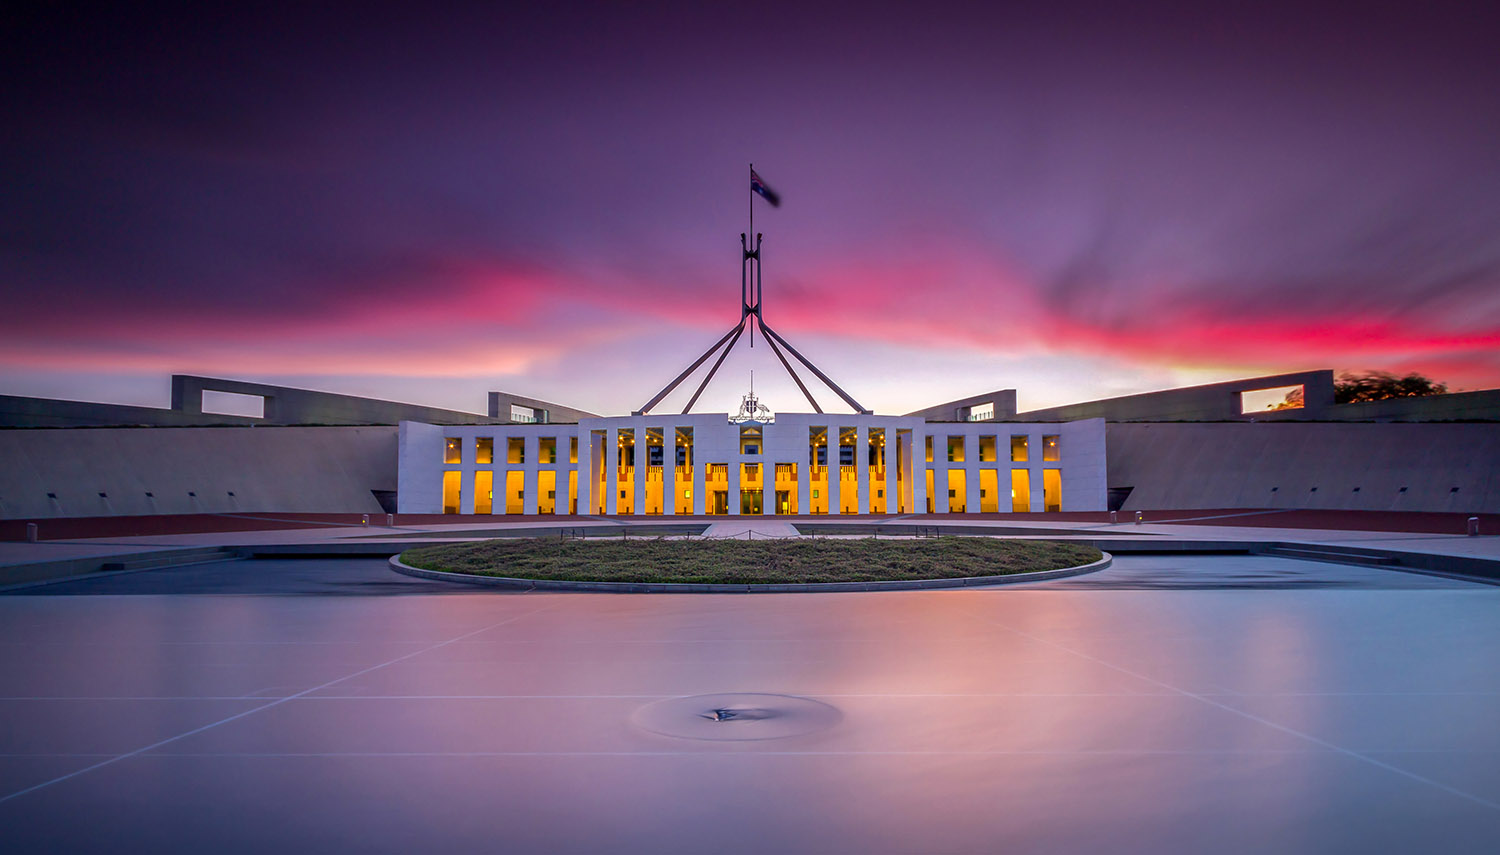 A short photo all the Australian Parliament House at dusk with beautiful pinks and purples from the sky reflected in the lake and the windows lit up